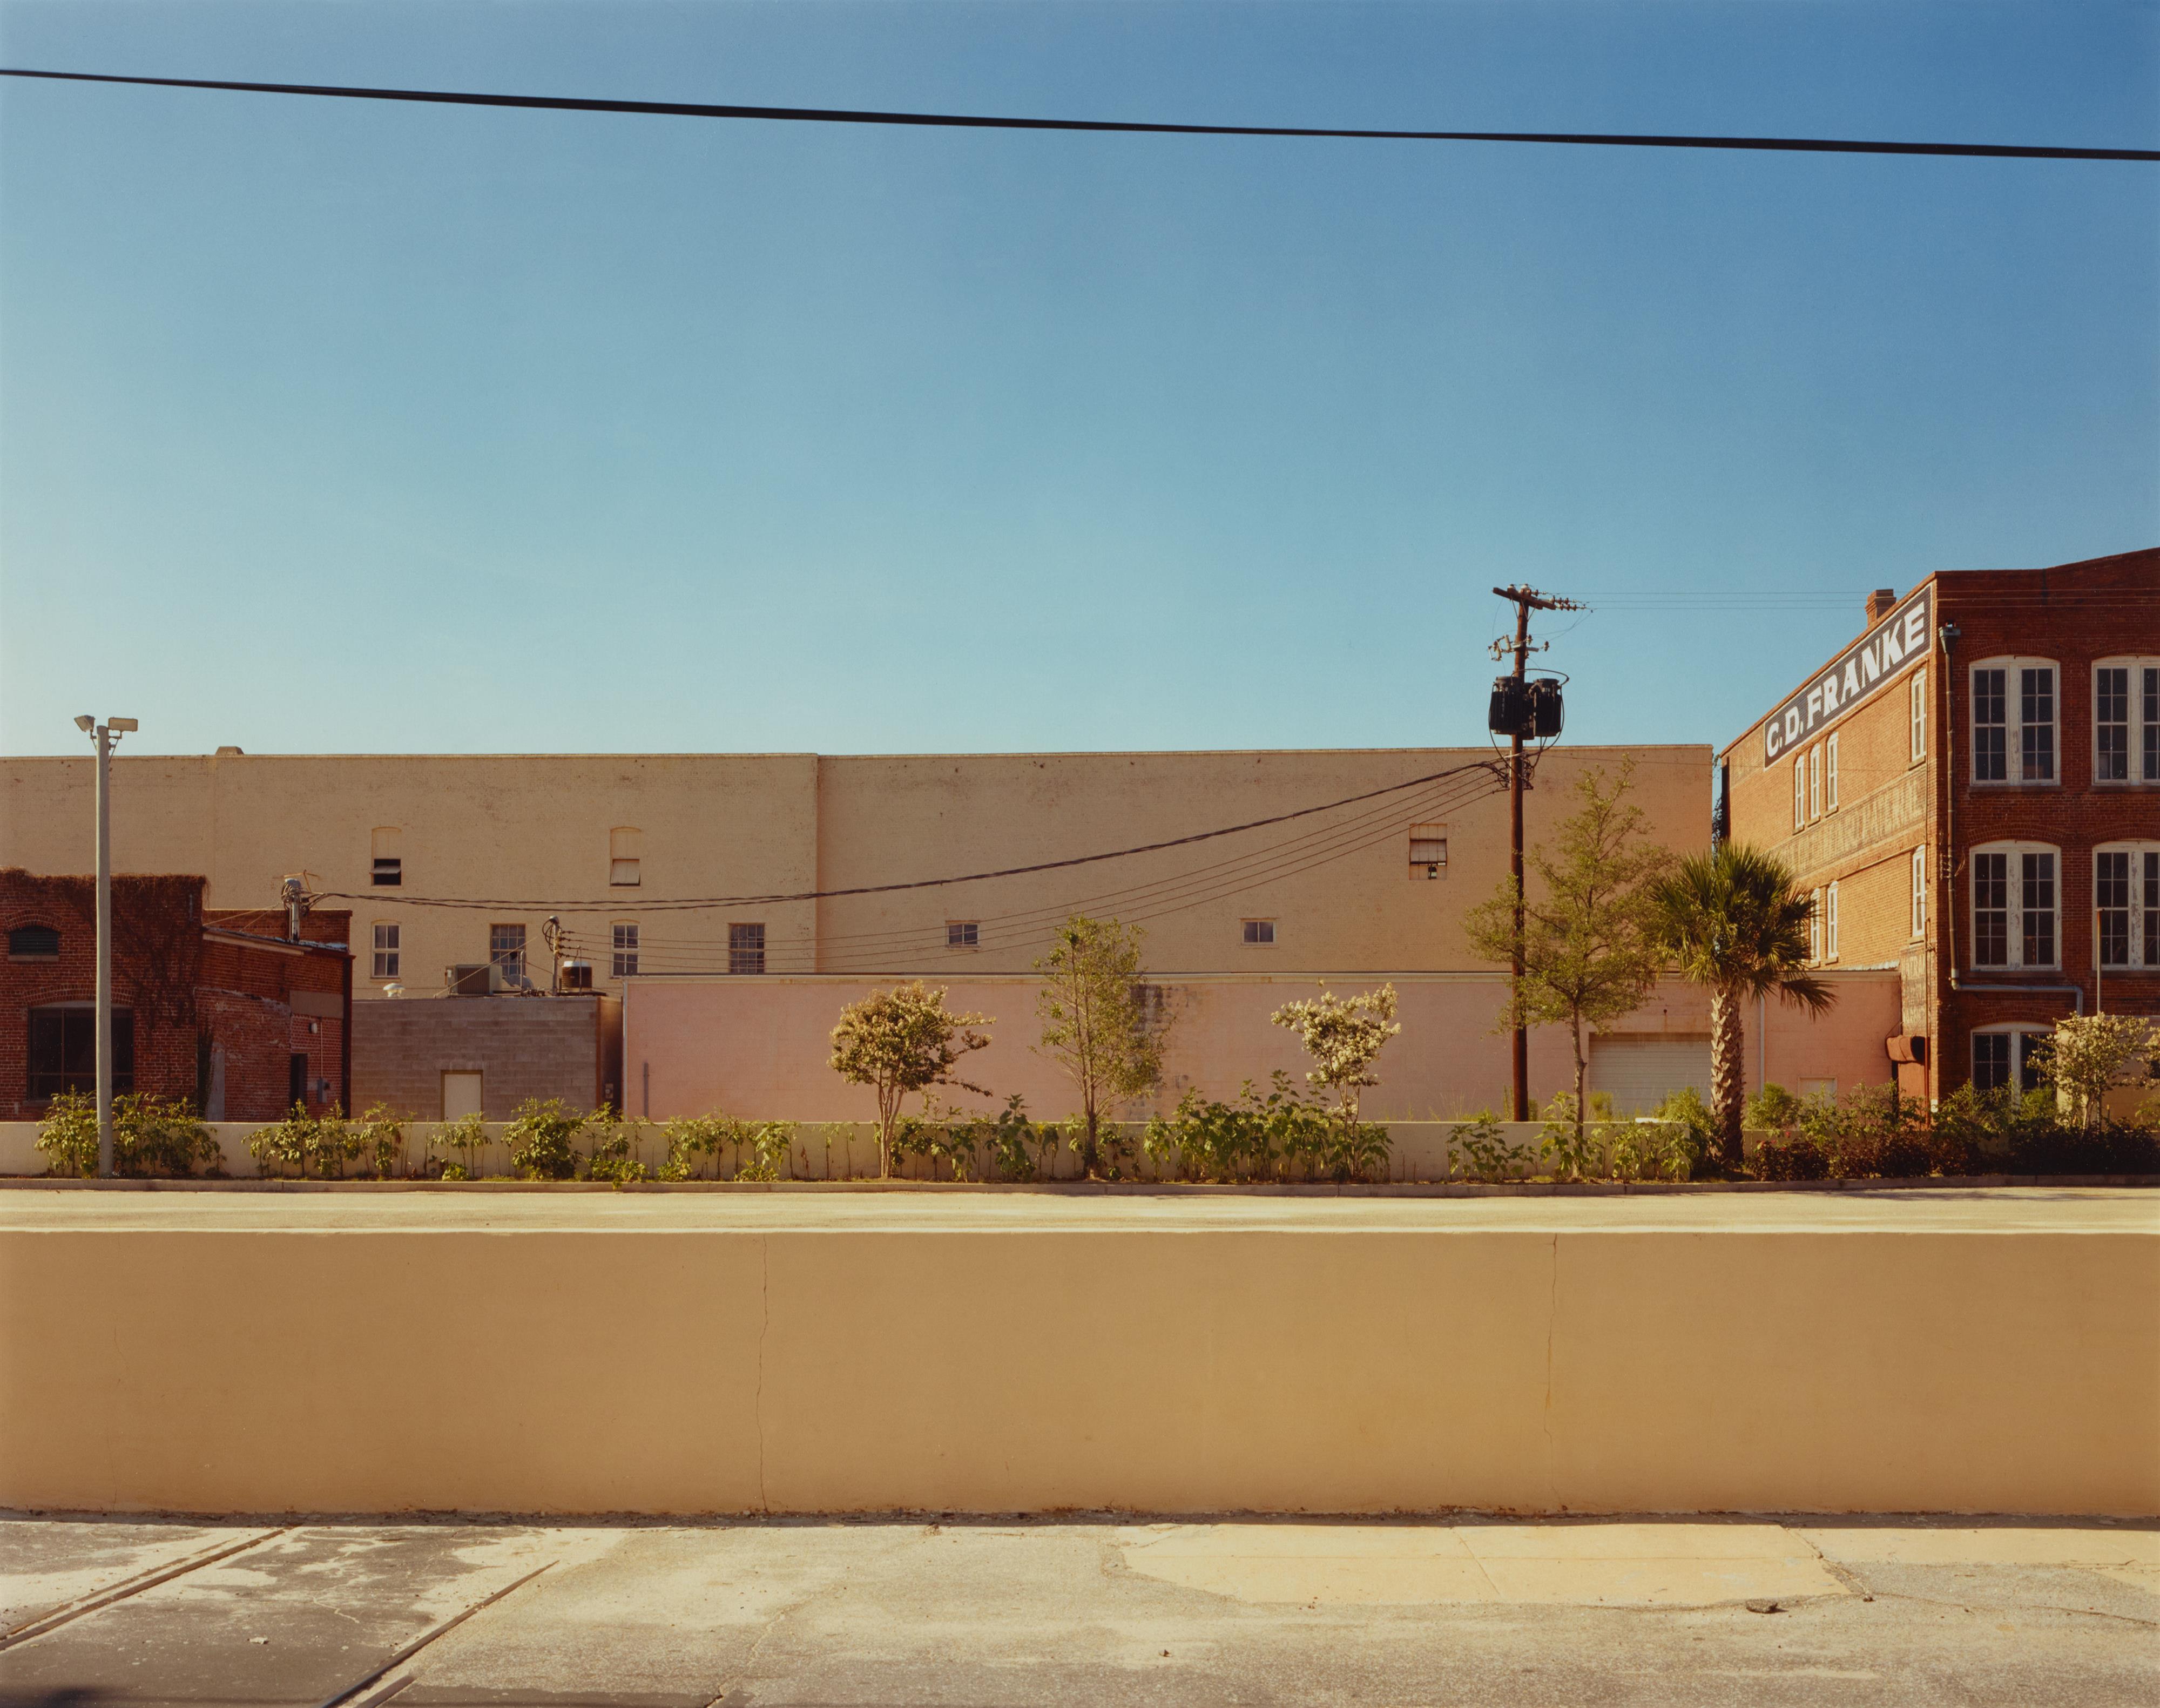 Stephen Shore - Cumberland Street, Charleston, South Carolina, 3/8/1975 (from the series: Uncommon Places) - image-1